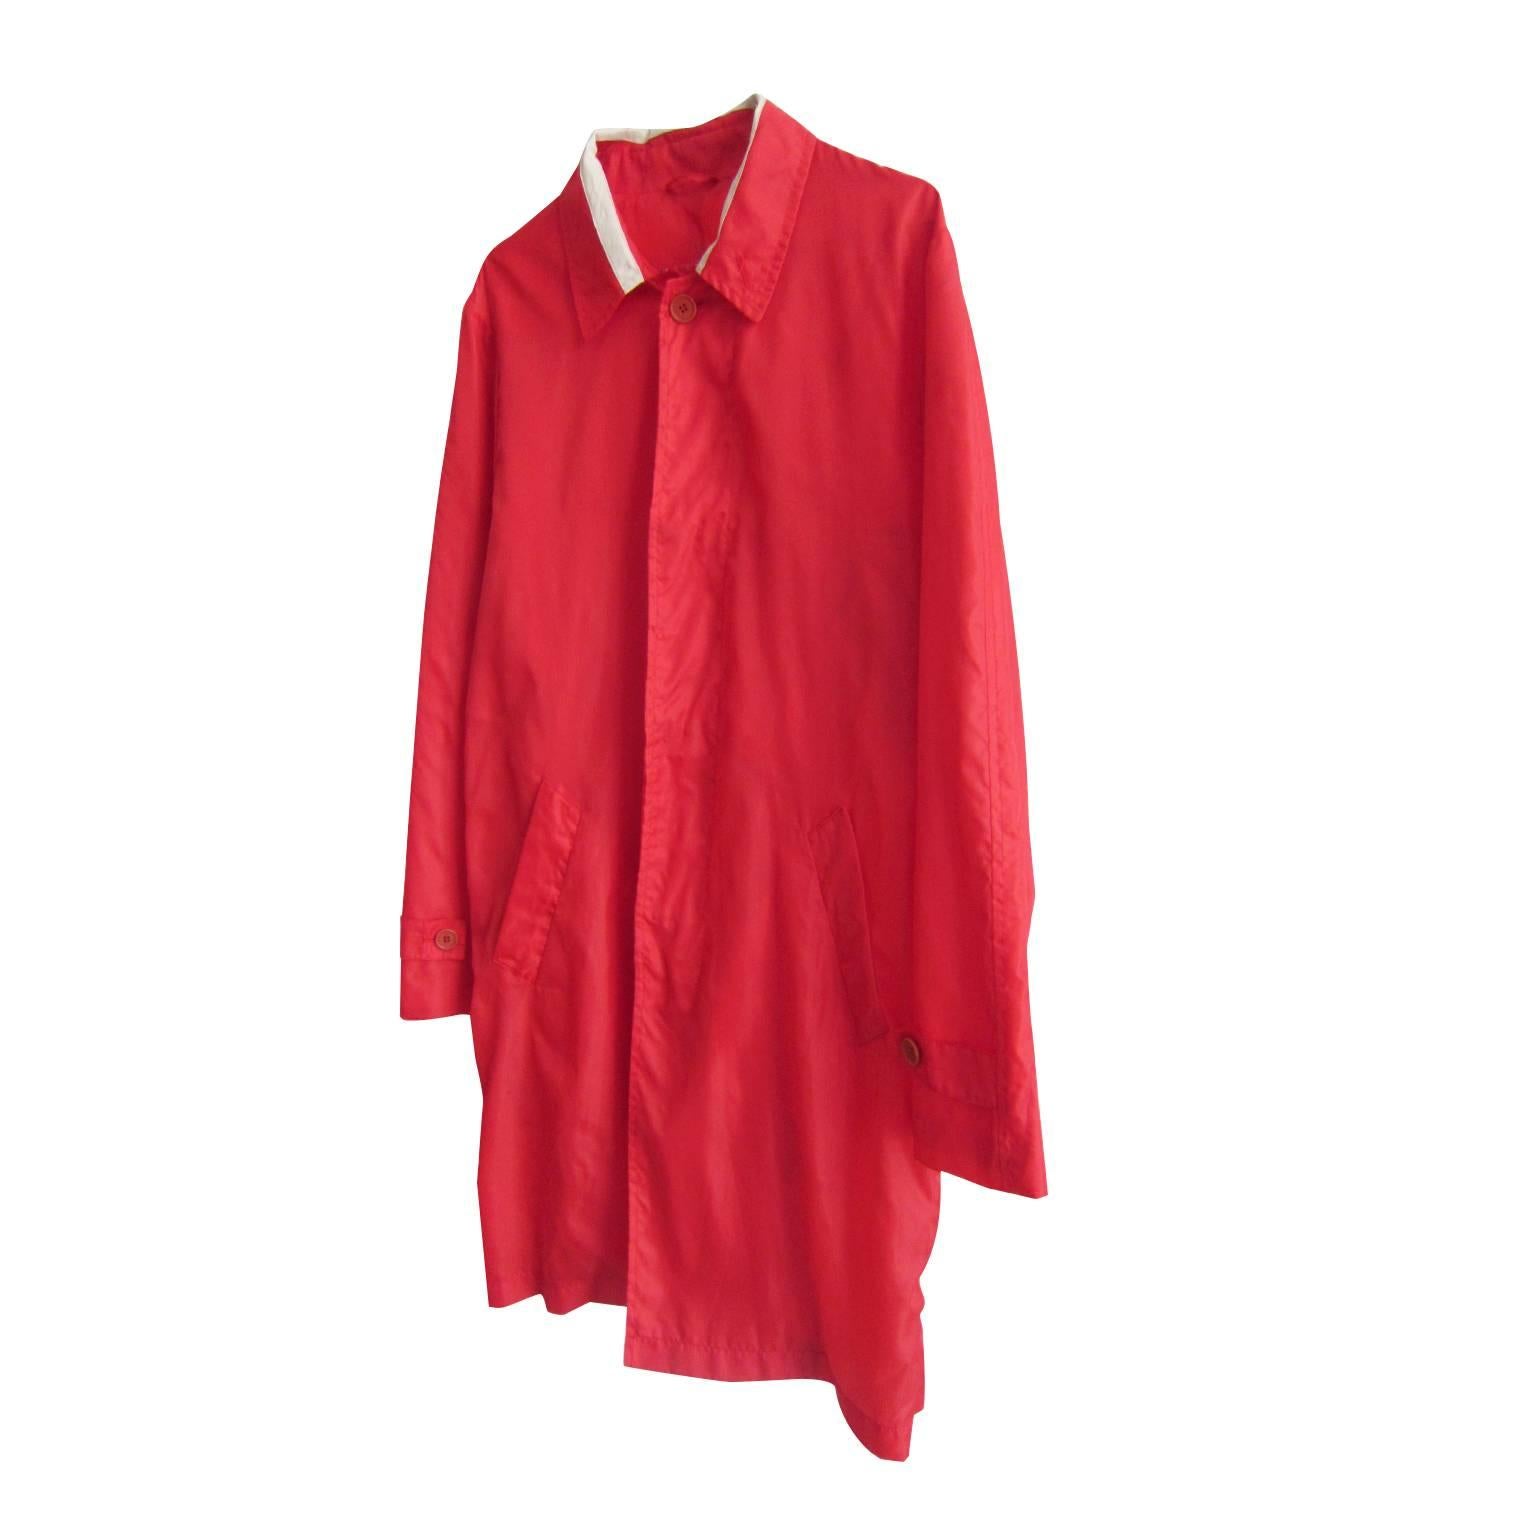 Helmut Lang neon red nylon buttoned coat jacket from S/S 1997. With light beige tape detail on the neck. 
Original size : 46 Italian
Measurement :
Sleeve : 63 cm
Length : 95 cm (From neck point back)
Shoulder : 46 cm
Under arm : 53 cm
